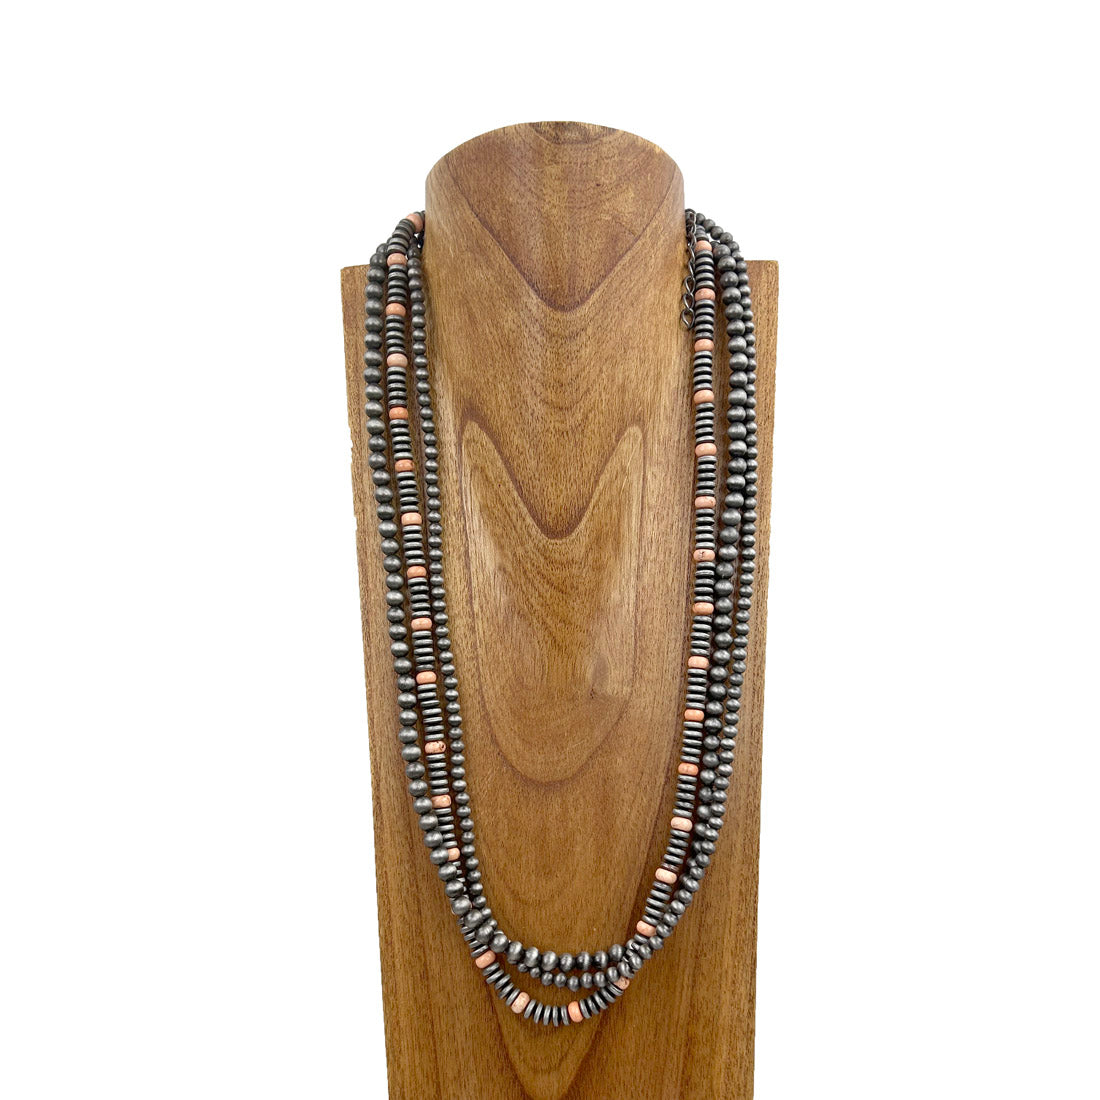 NKS230812-03        31 inches silver Navajo pearl with orange stone beads Necklace